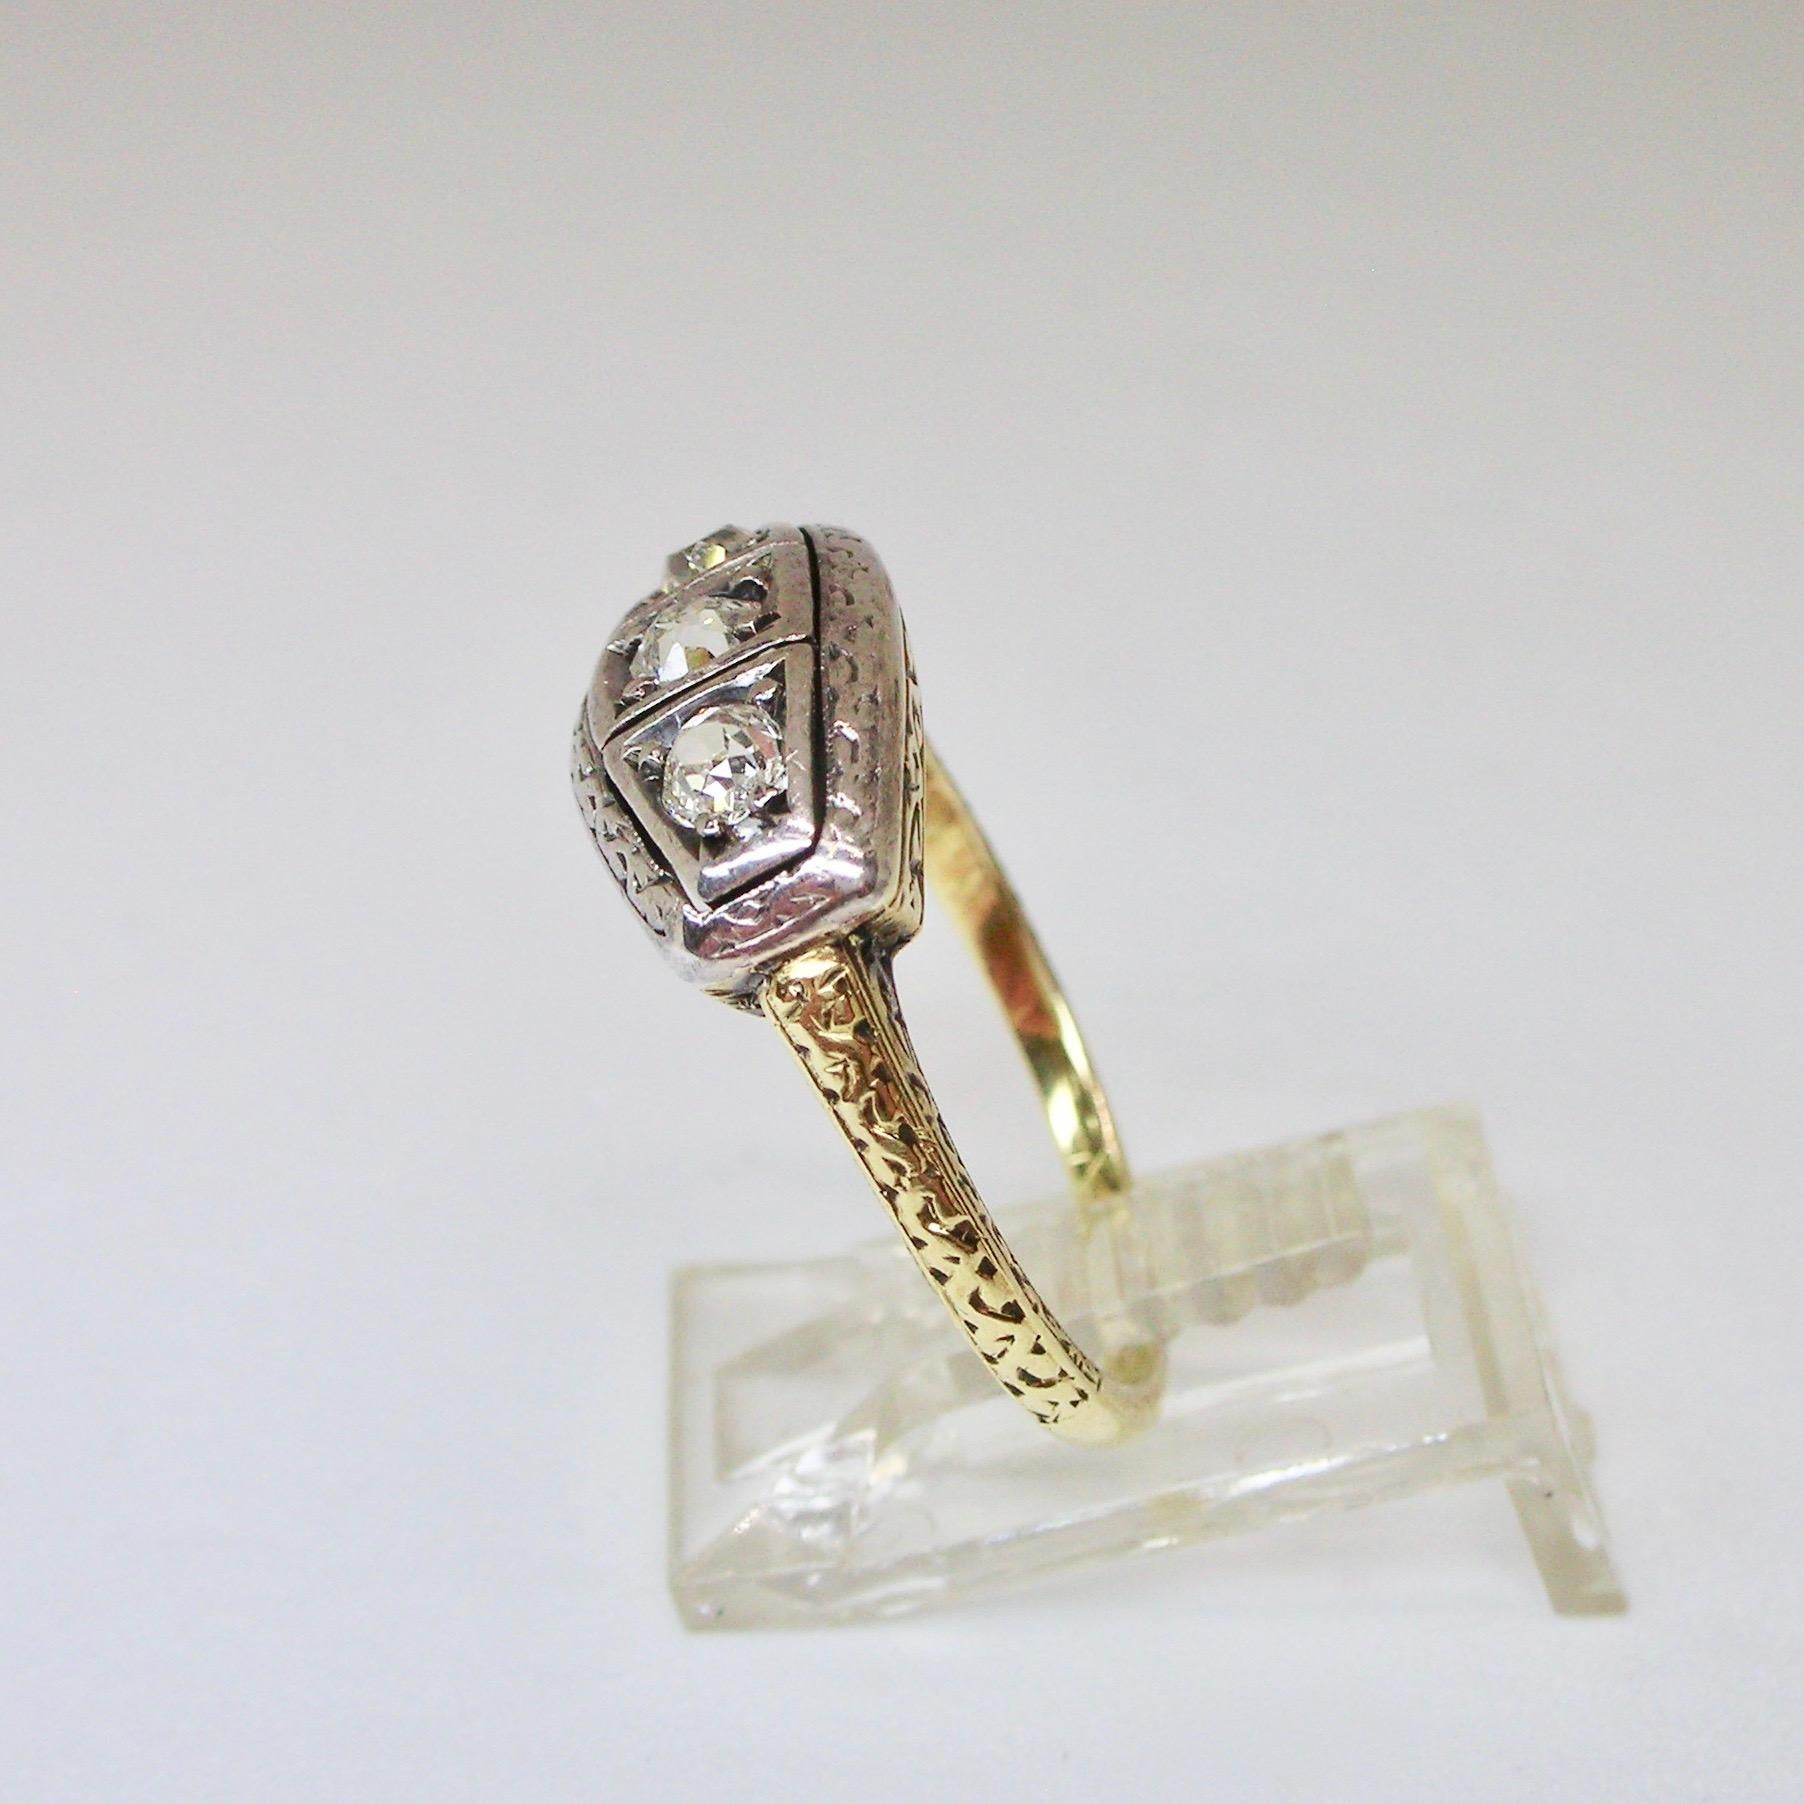 Old cut diamond ring from the beginning of the 1900’s, Italian, set in white and yellow 18kt gold, finely engraved with old mine cut diamonds for circa 0.40ct total.